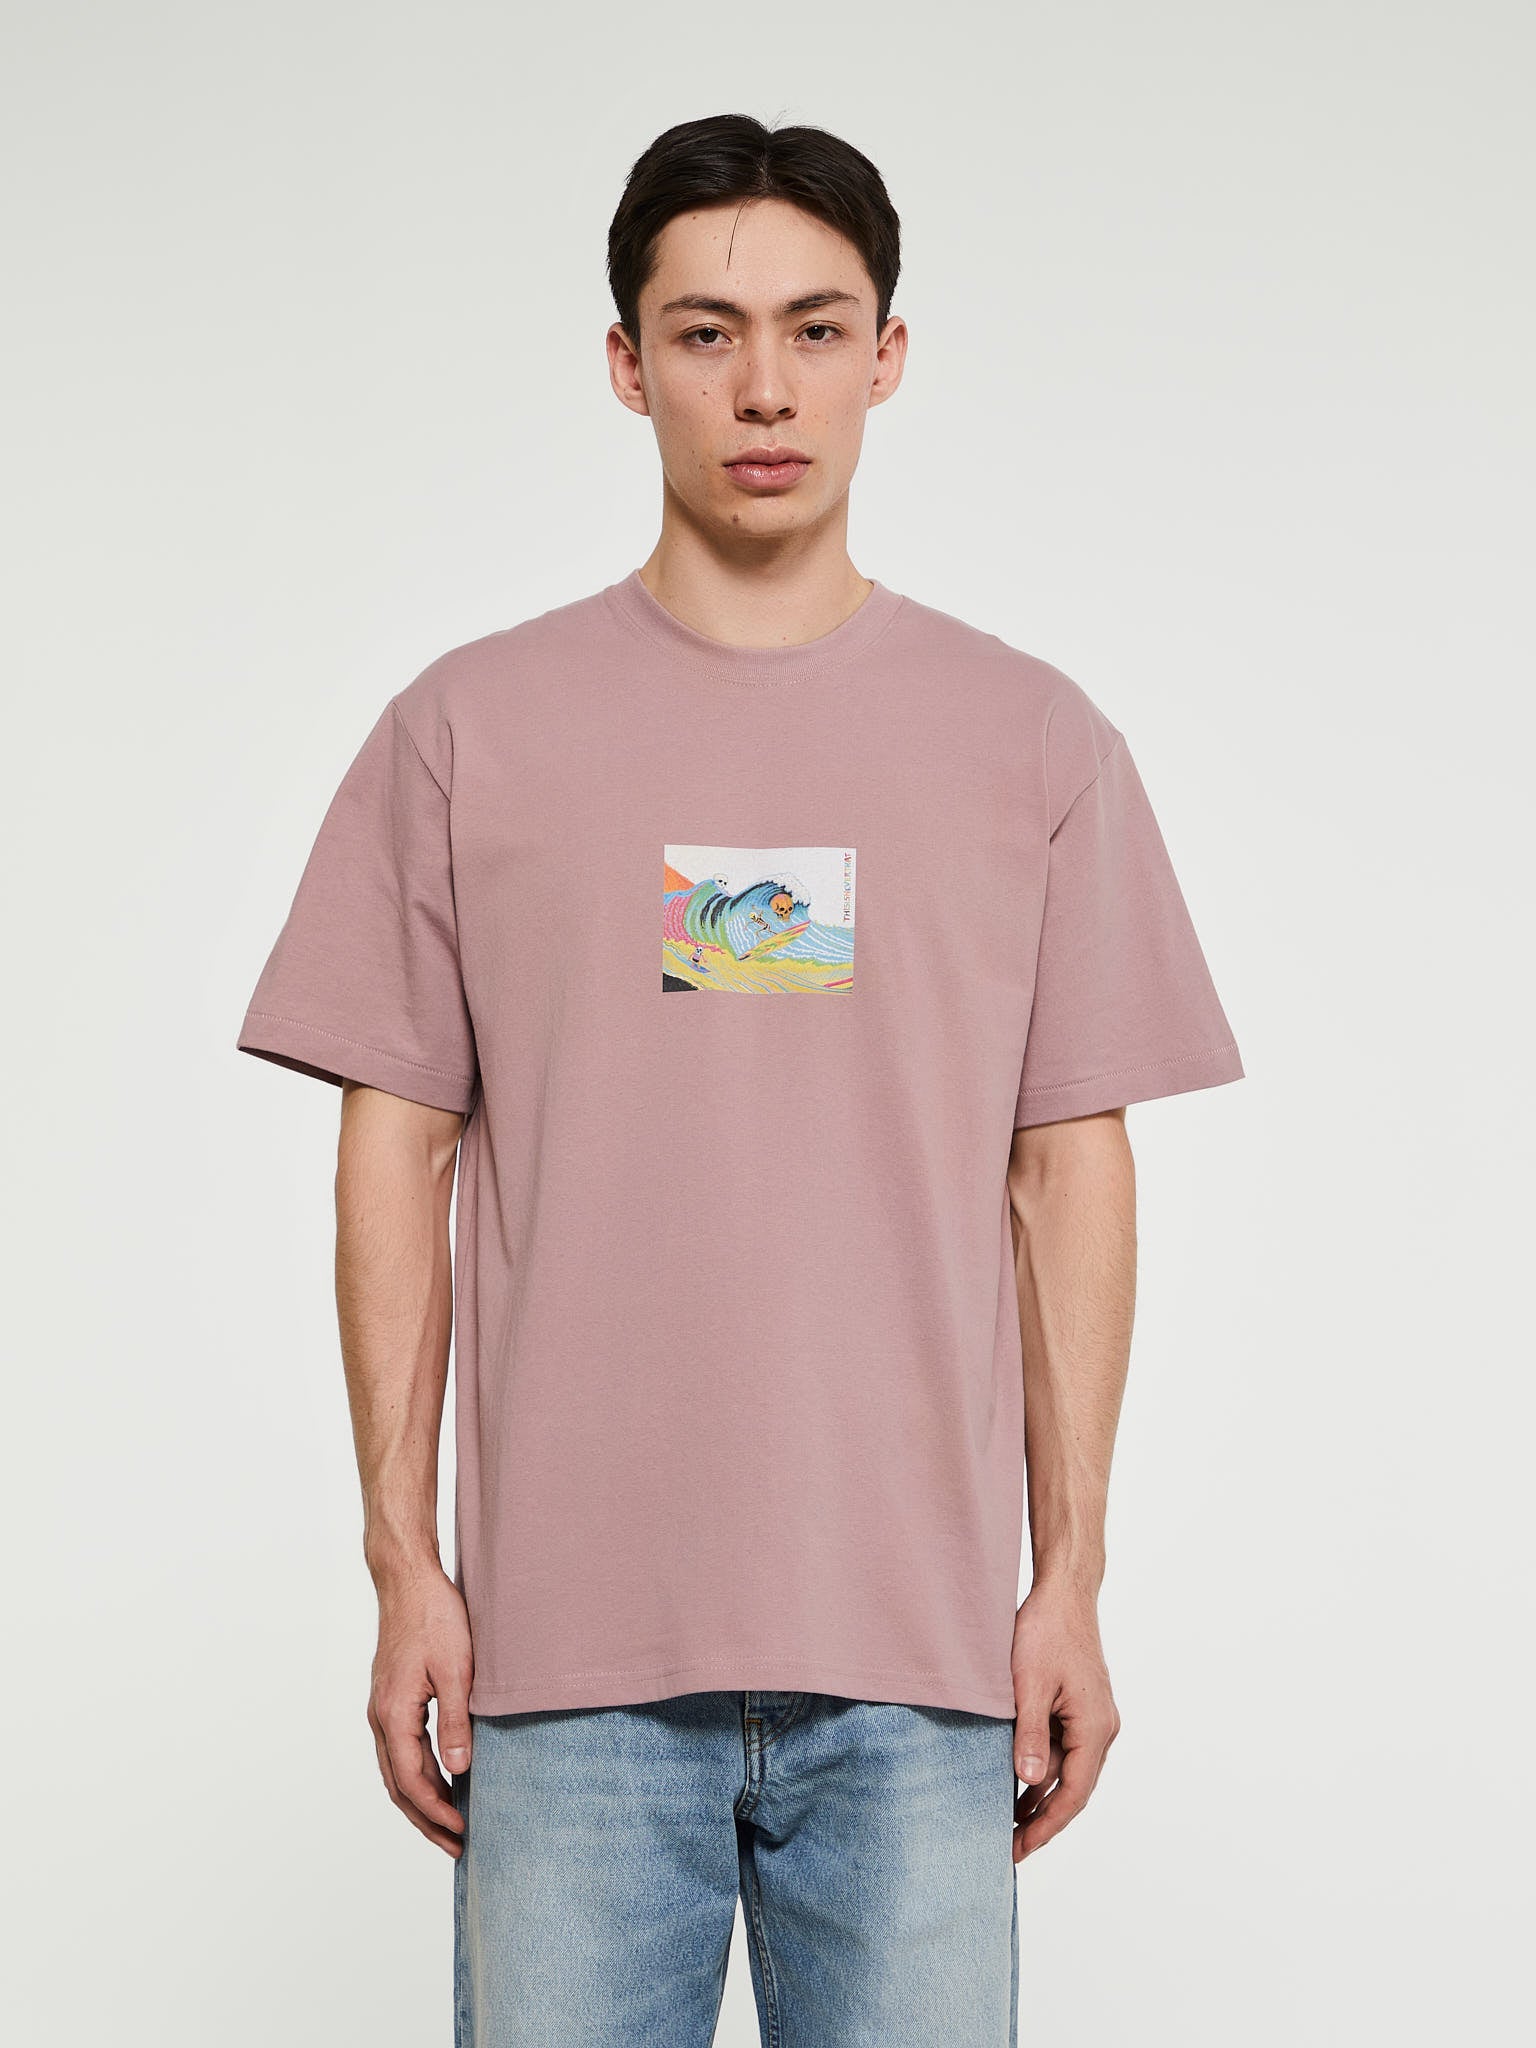 Amped T-Shirt in Dusty Pink